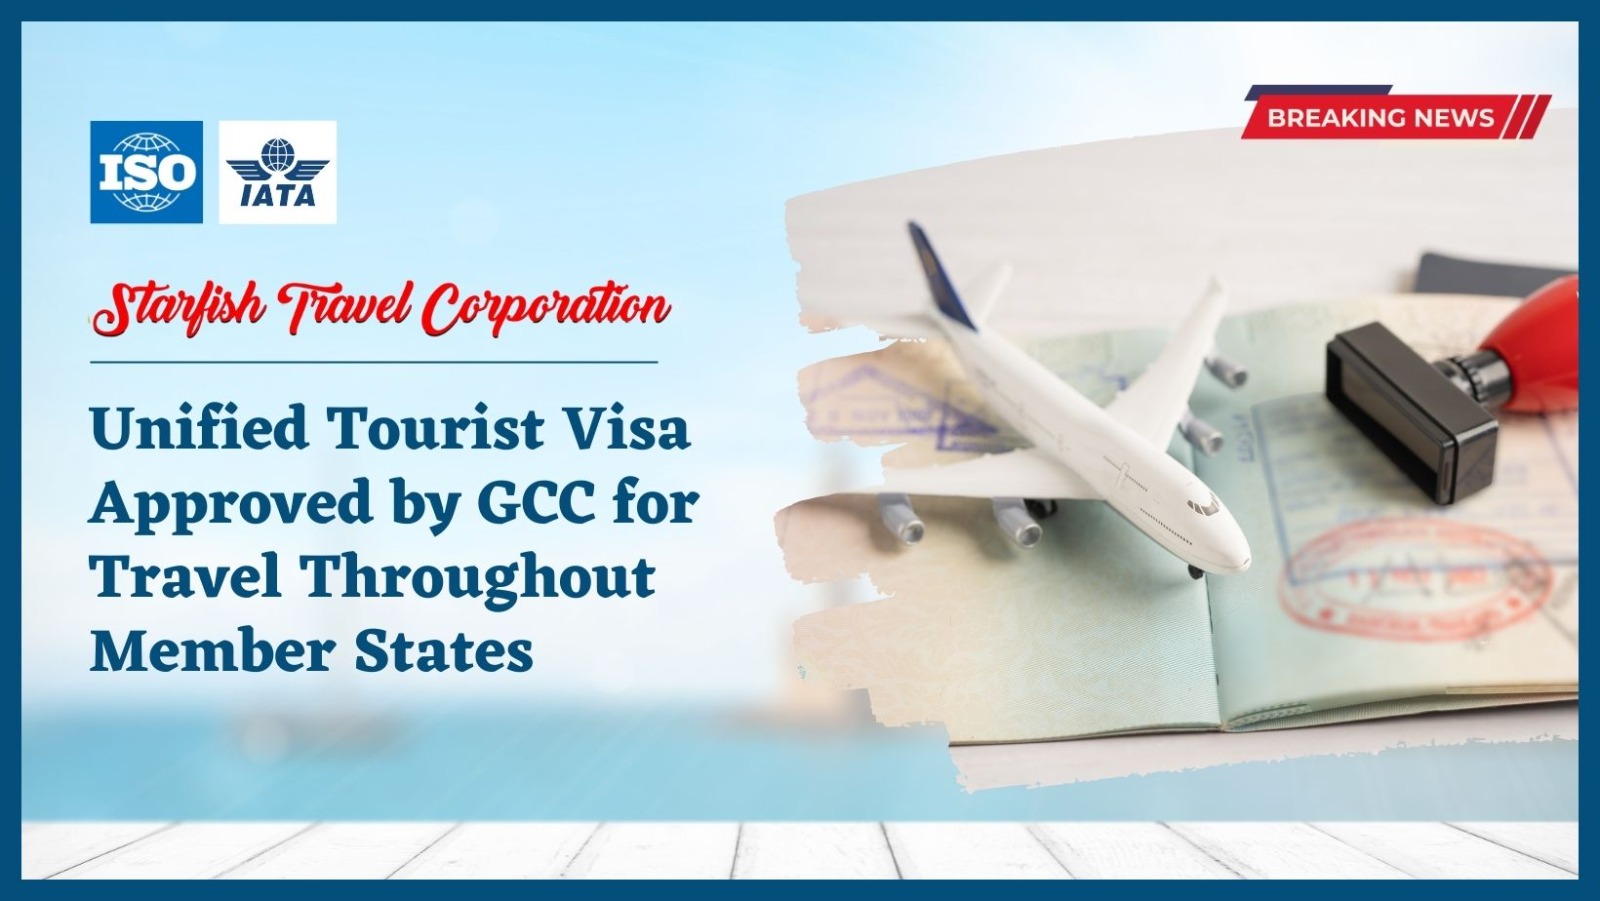 Unified Tourist Visa Approved by GCC for Travel Throughout Member States